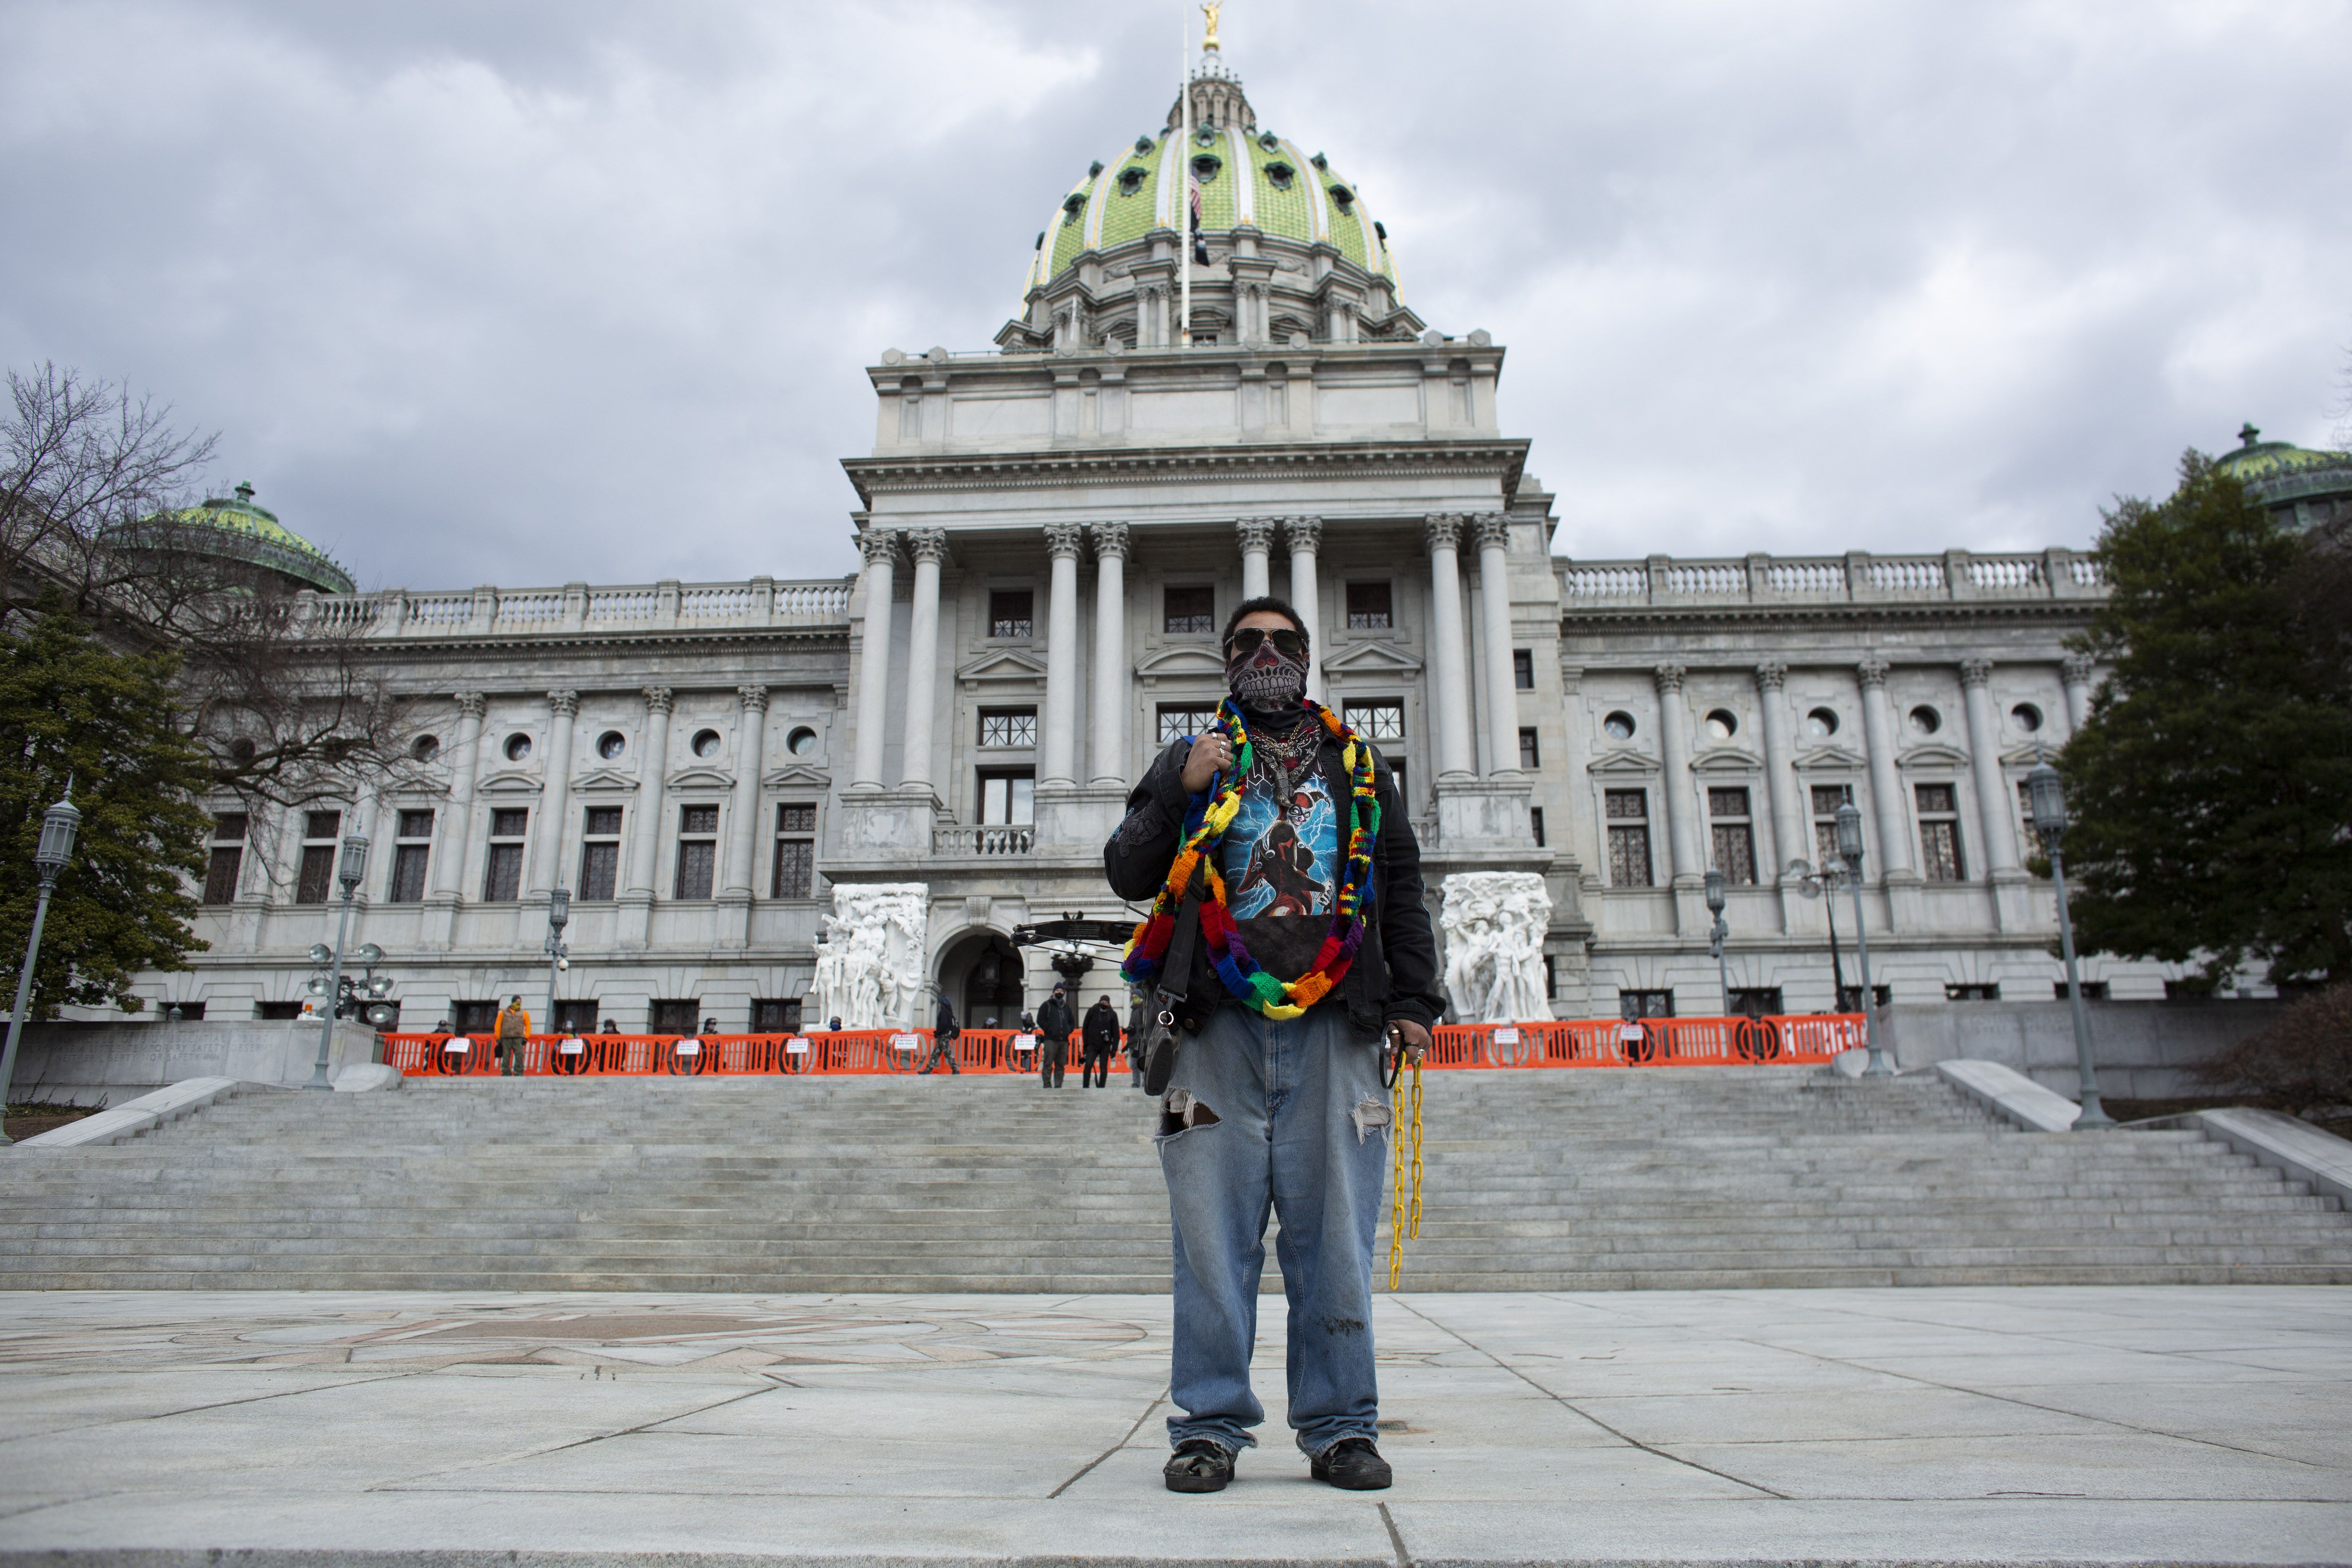 A protester carries a crossbow outside the Capitol in Harrisburg, Pennsylvania on January 17